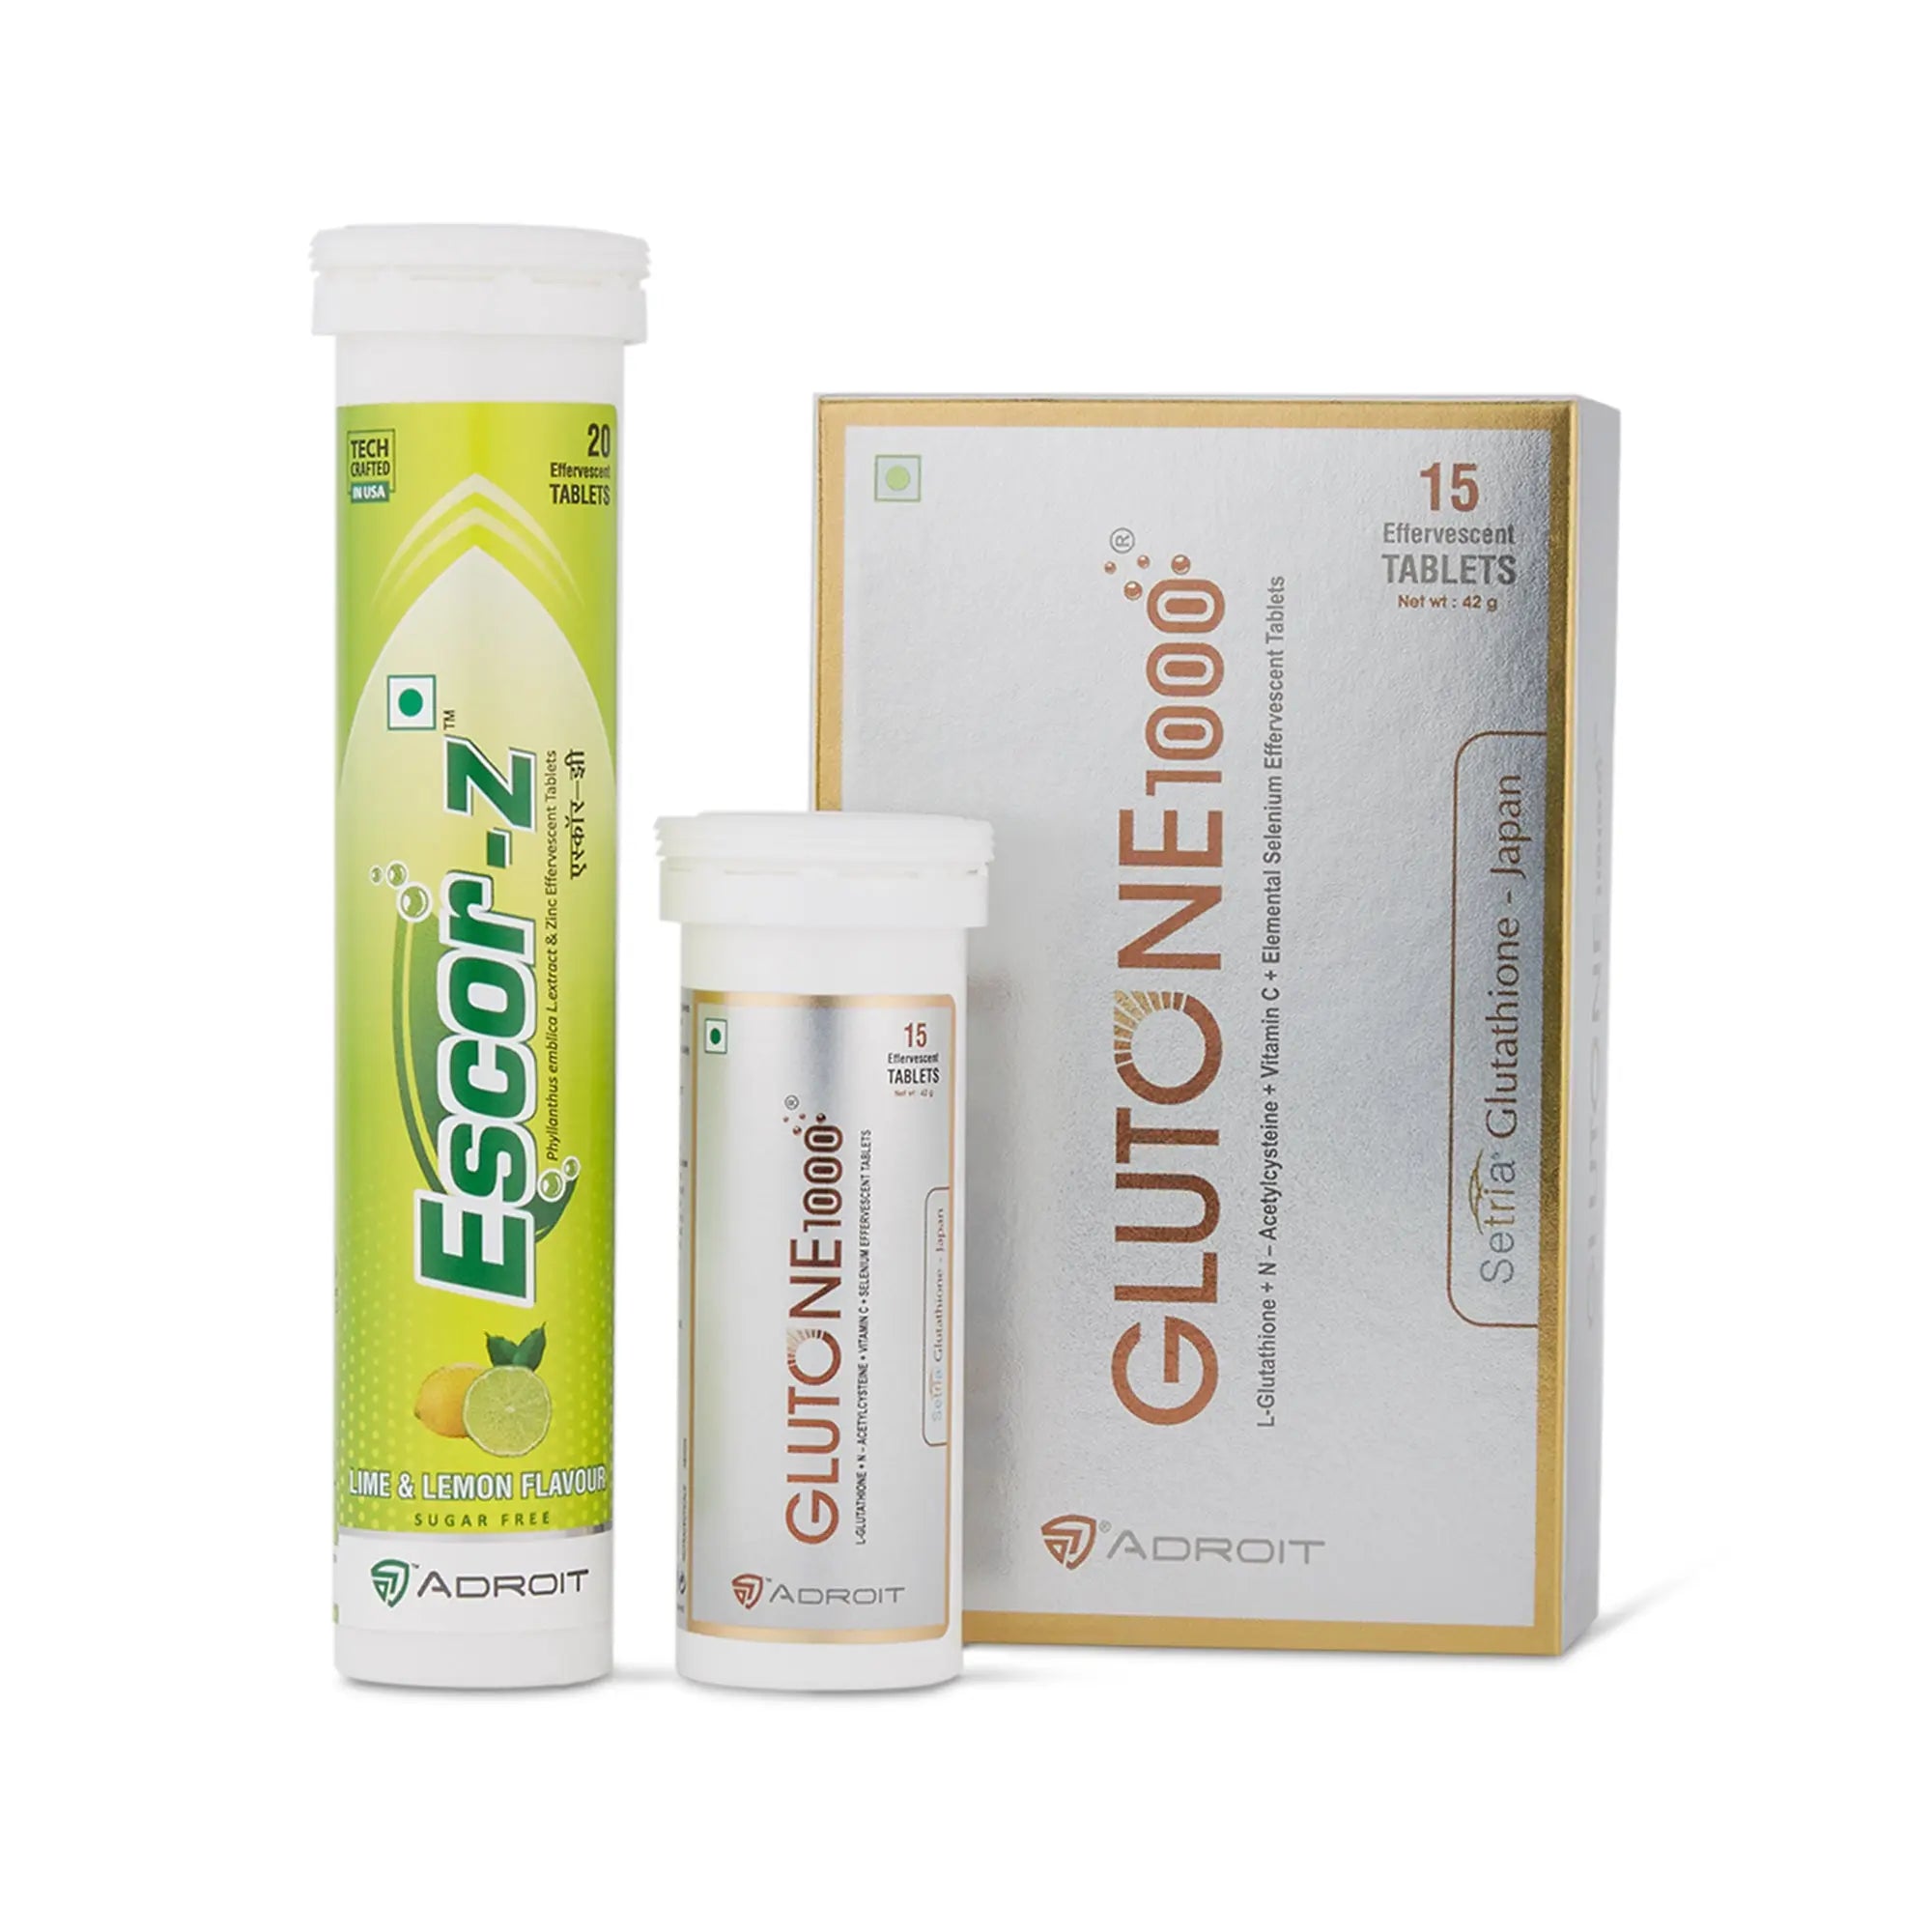 Glutone 1000 Effervescent Tablets with Escor-Z Natural Vitamin C Tablets Lime & Lemon Flavour Pack of 2 | Skin Glow and Radiance | Even Skin Tone I Boosts Collagen